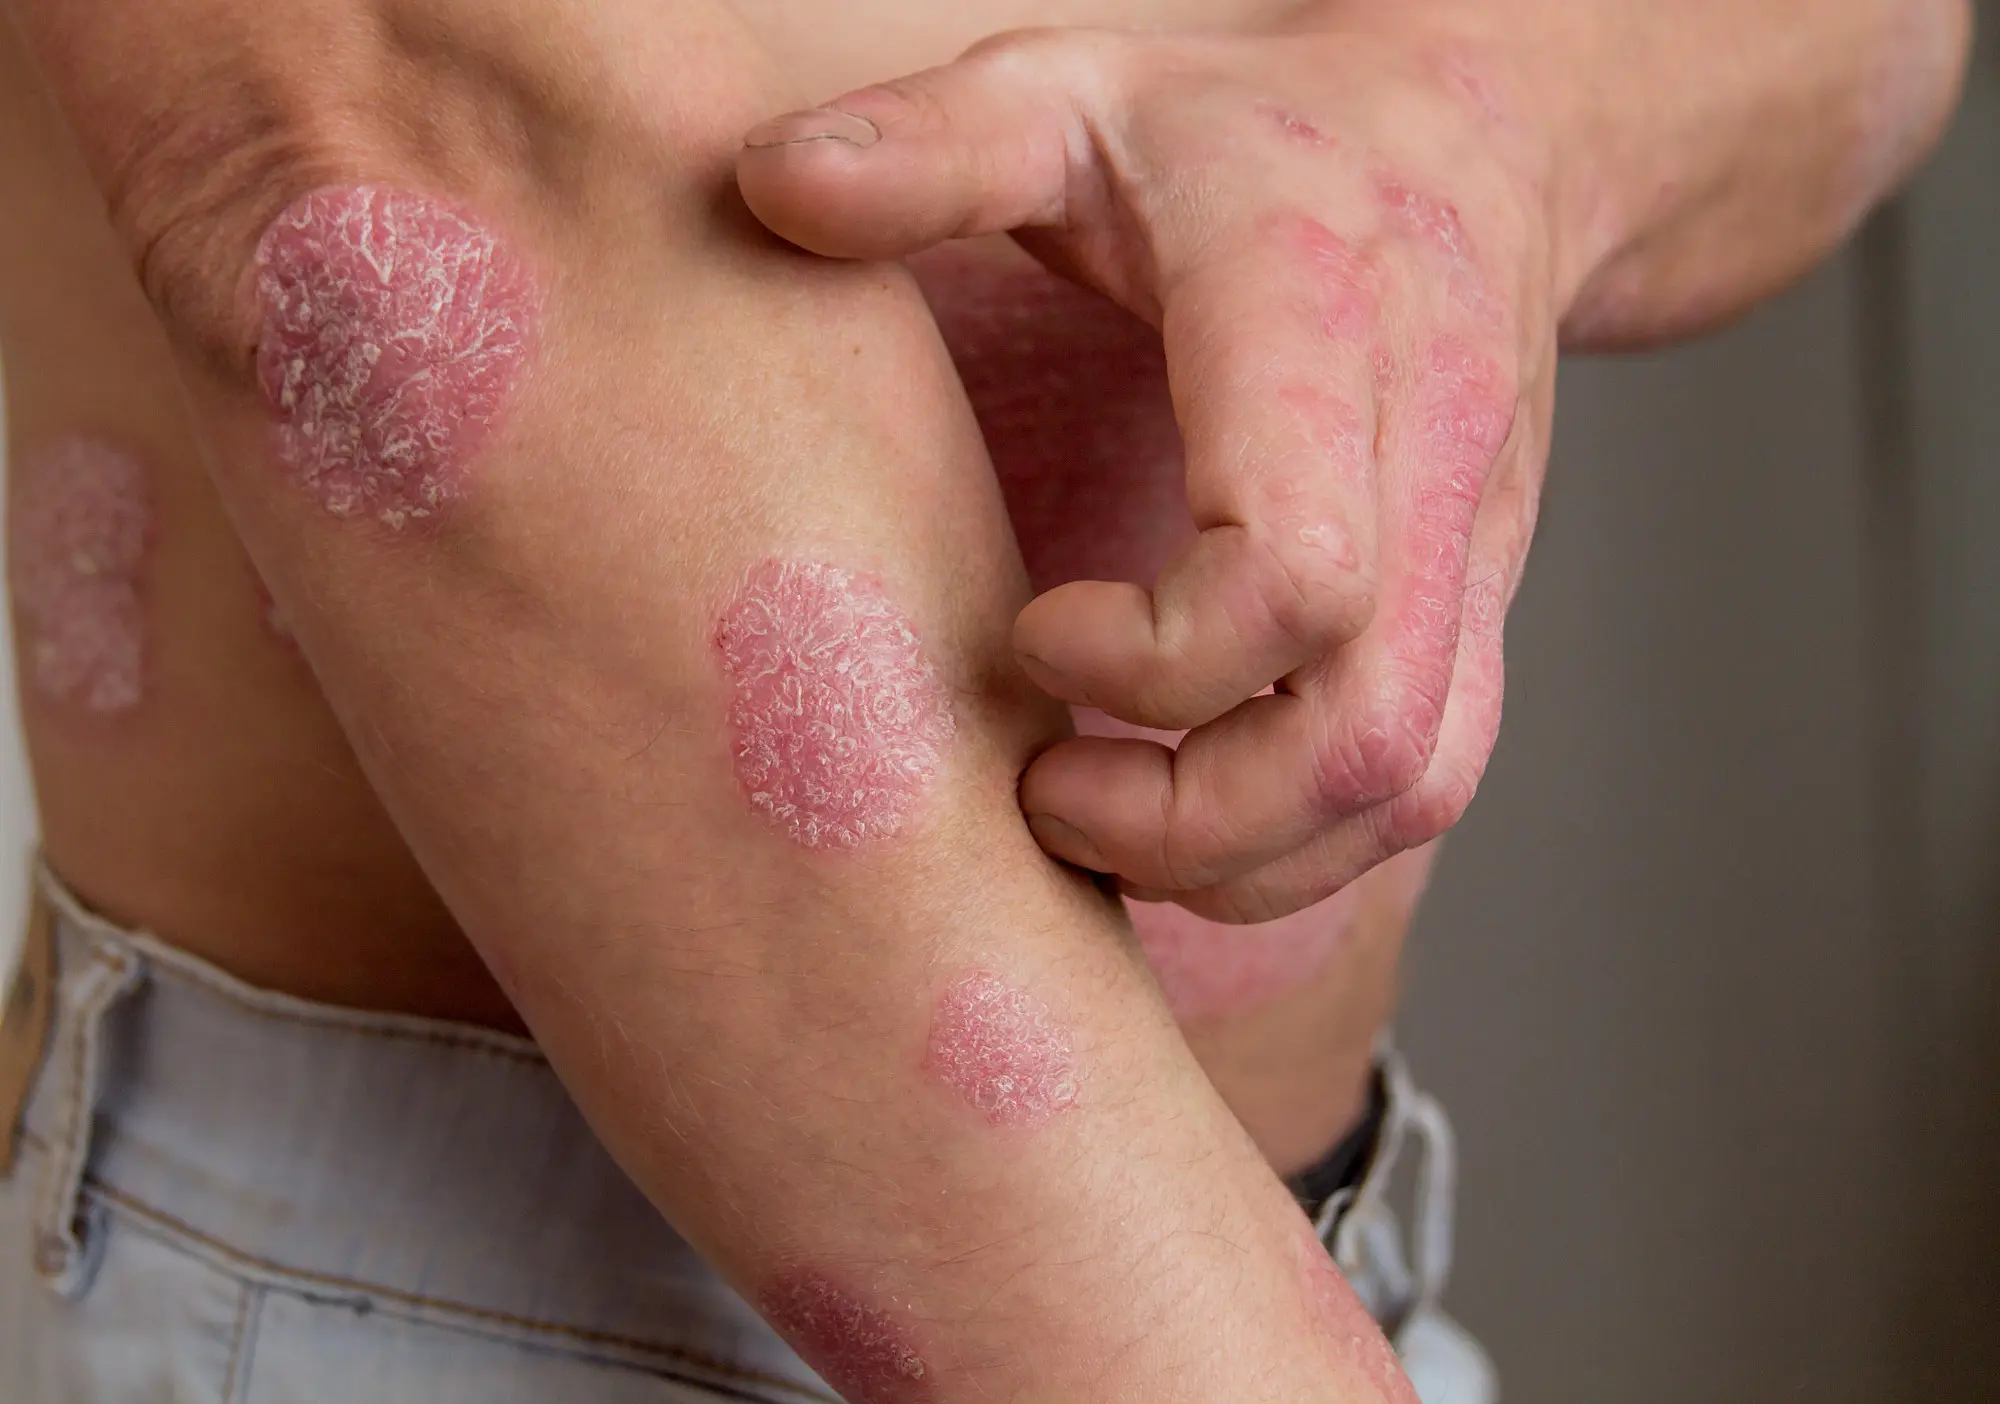 What's the best way to treat eczema from the inside out?